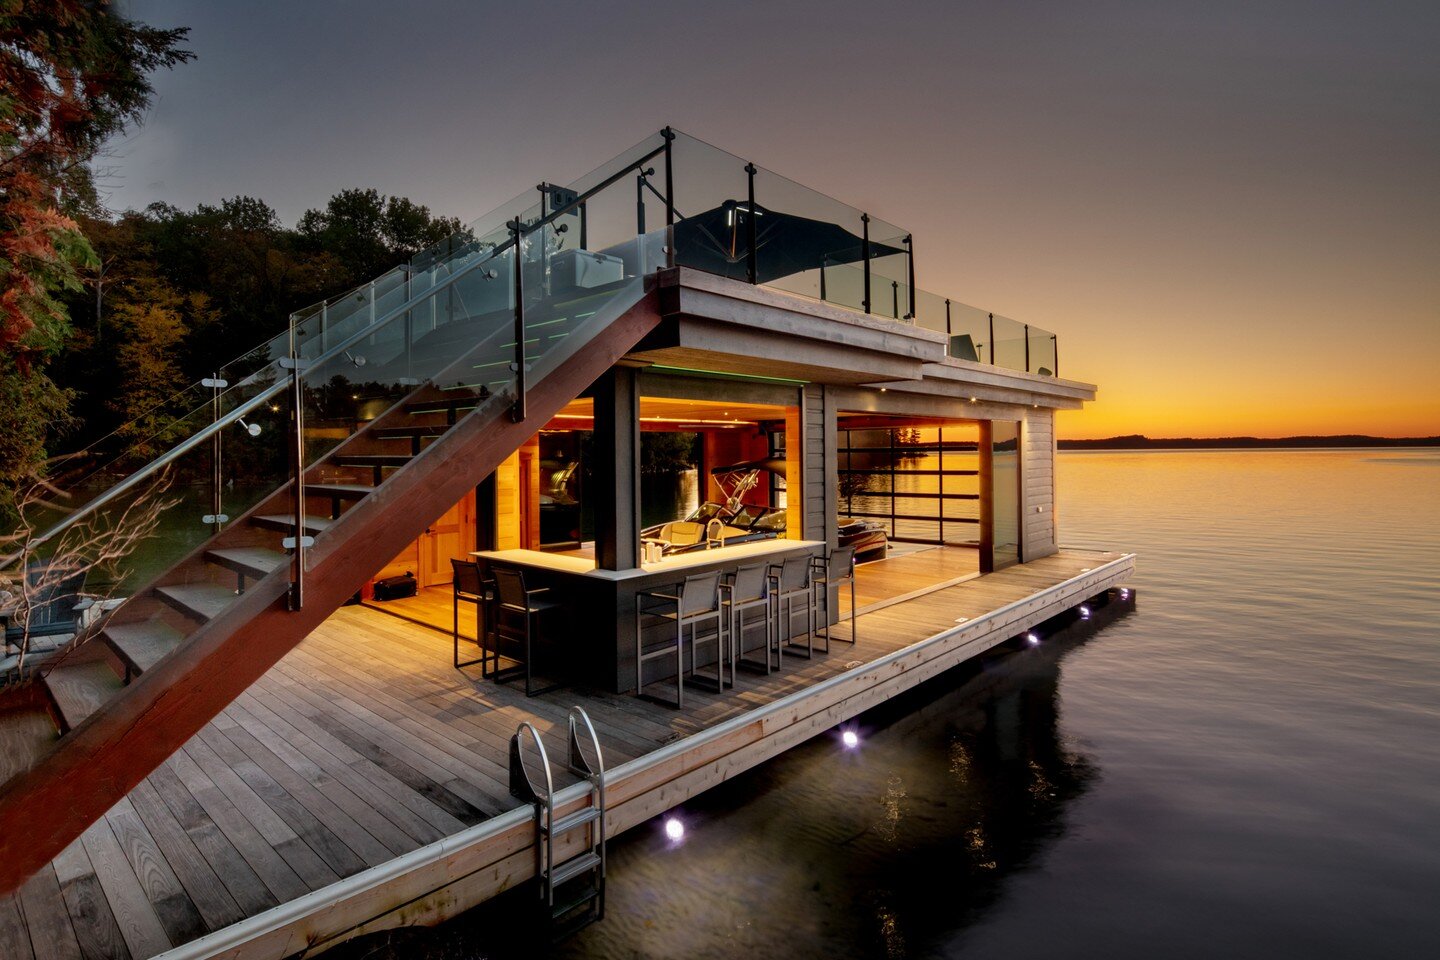 Spectacular views from this beautiful boathouse. Photographing projects to create dramatic results takes patience and a vision. Contact us today to find out how we can bring your projects to life!
.
.
@gilbertandburke 
.
#architecturalphotographer #a